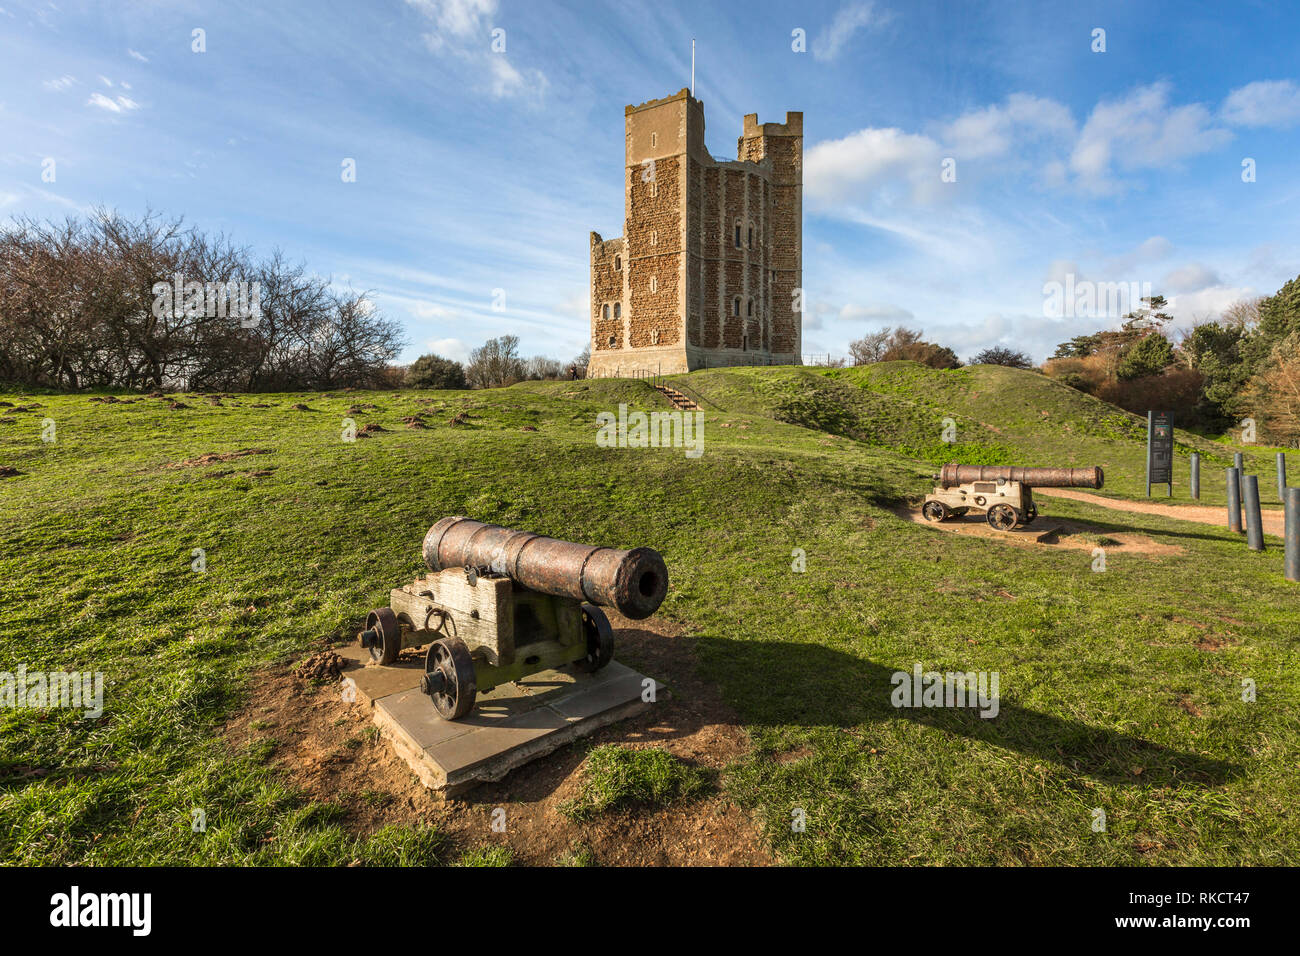 12th century Orford castle, Orford, Suffolk, UK, with two C1800 cannon. Stock Photo